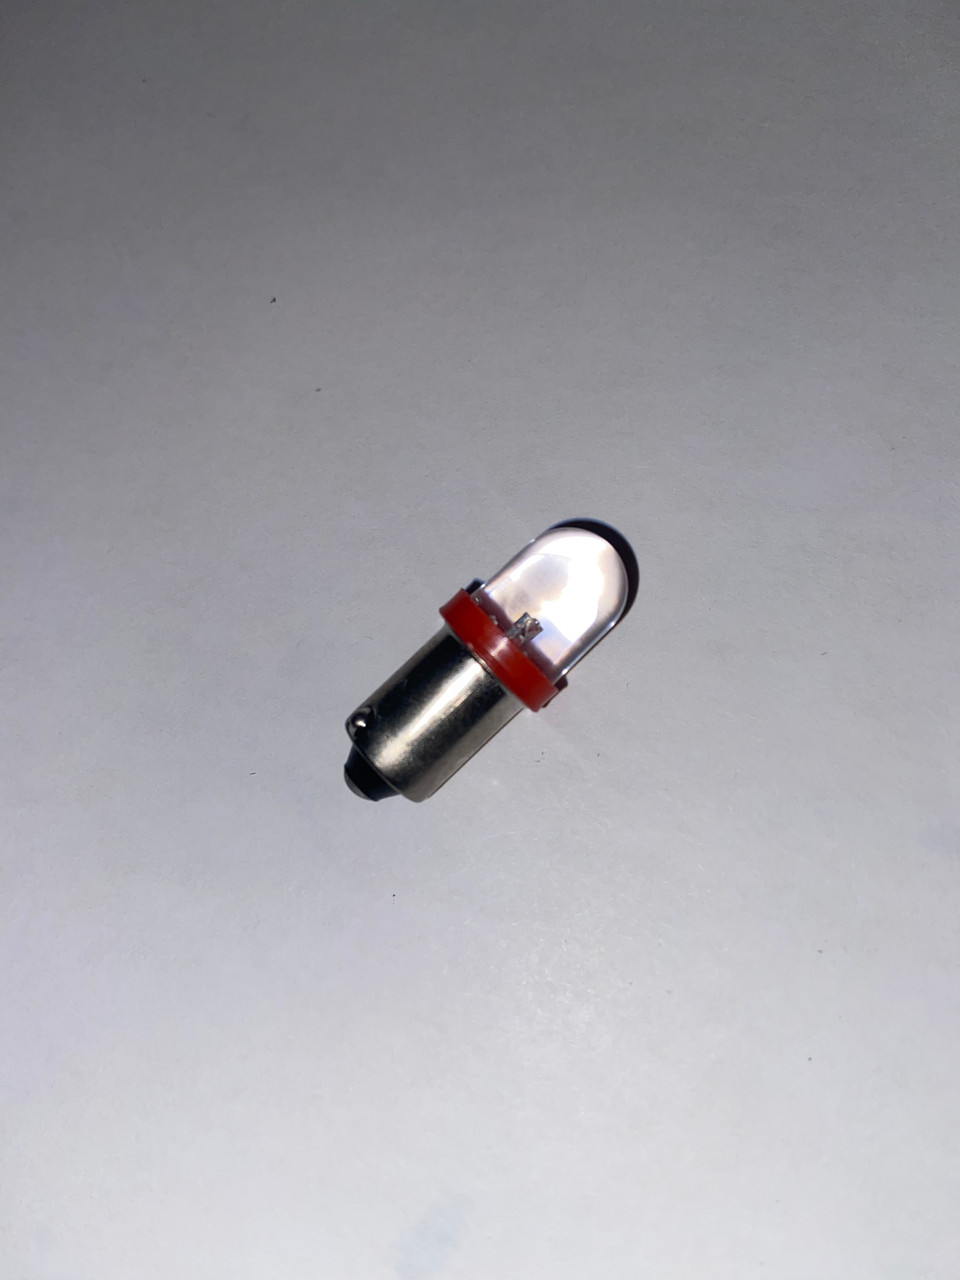 BMW 6 VOLT LED RED GENERATOR BULB USED IN MANY MODELS NEW